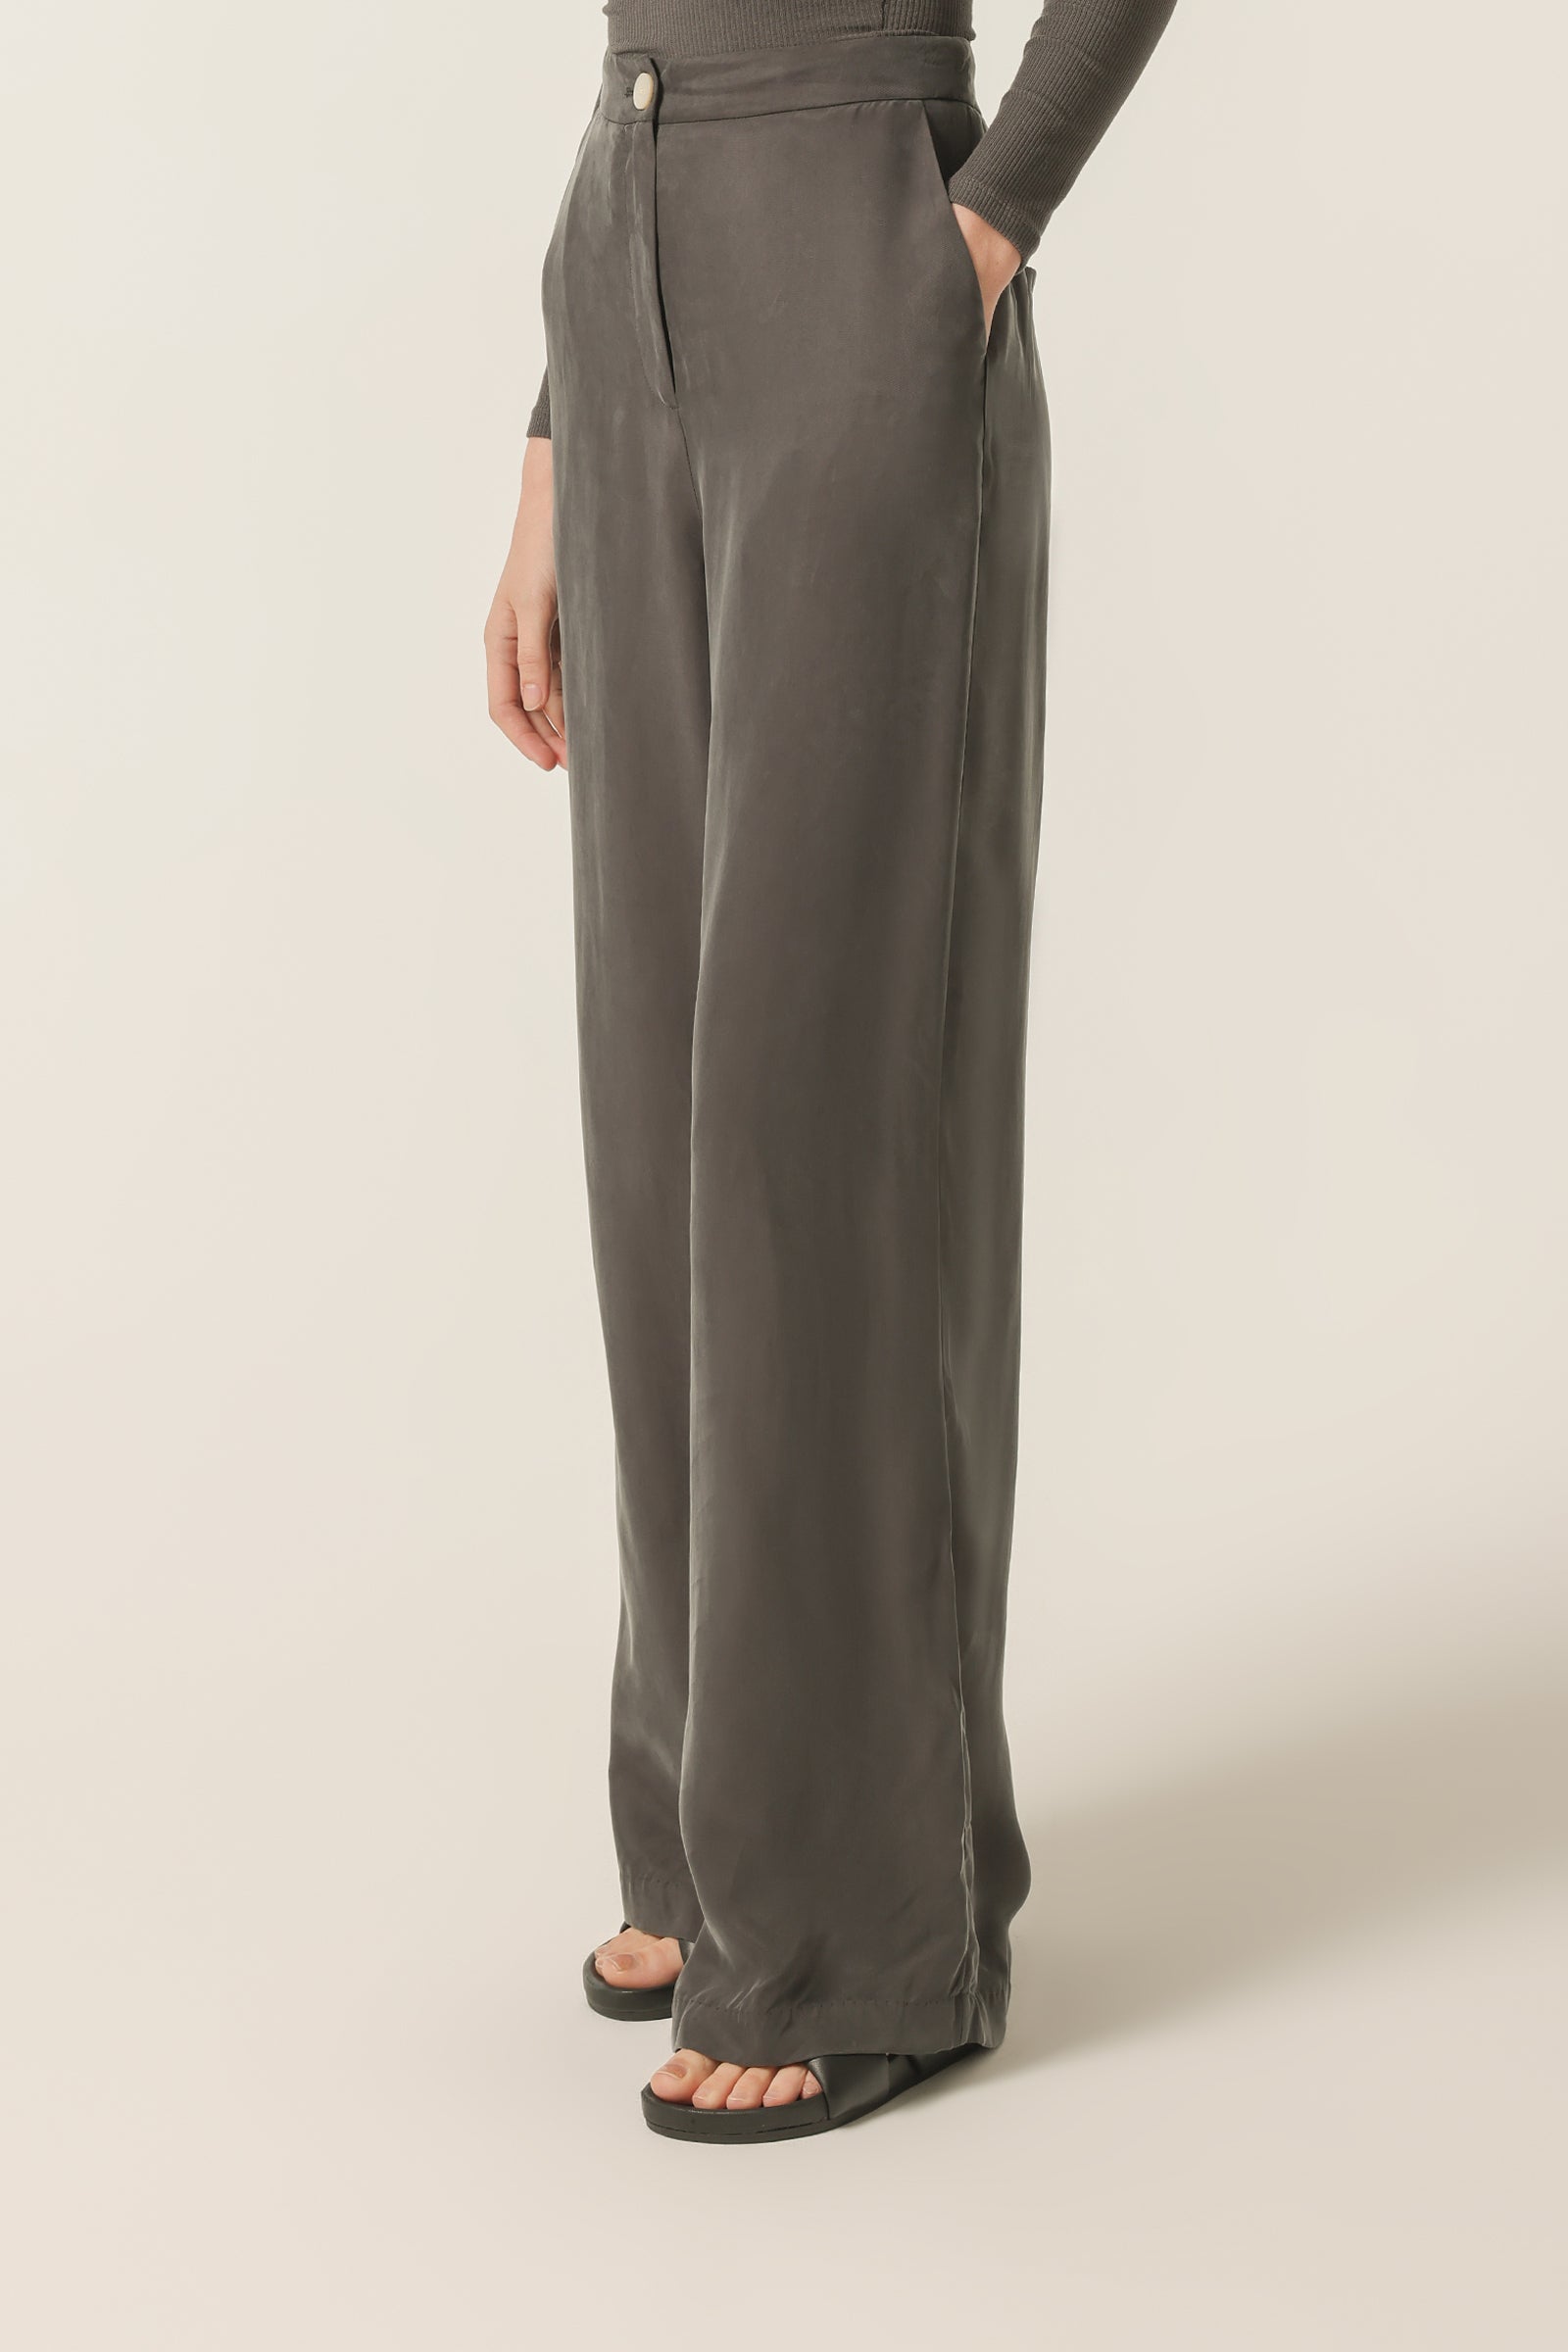 Nude Lucy Gia Cupro Pant In A Dark Grey In A Brown Coal Colour 